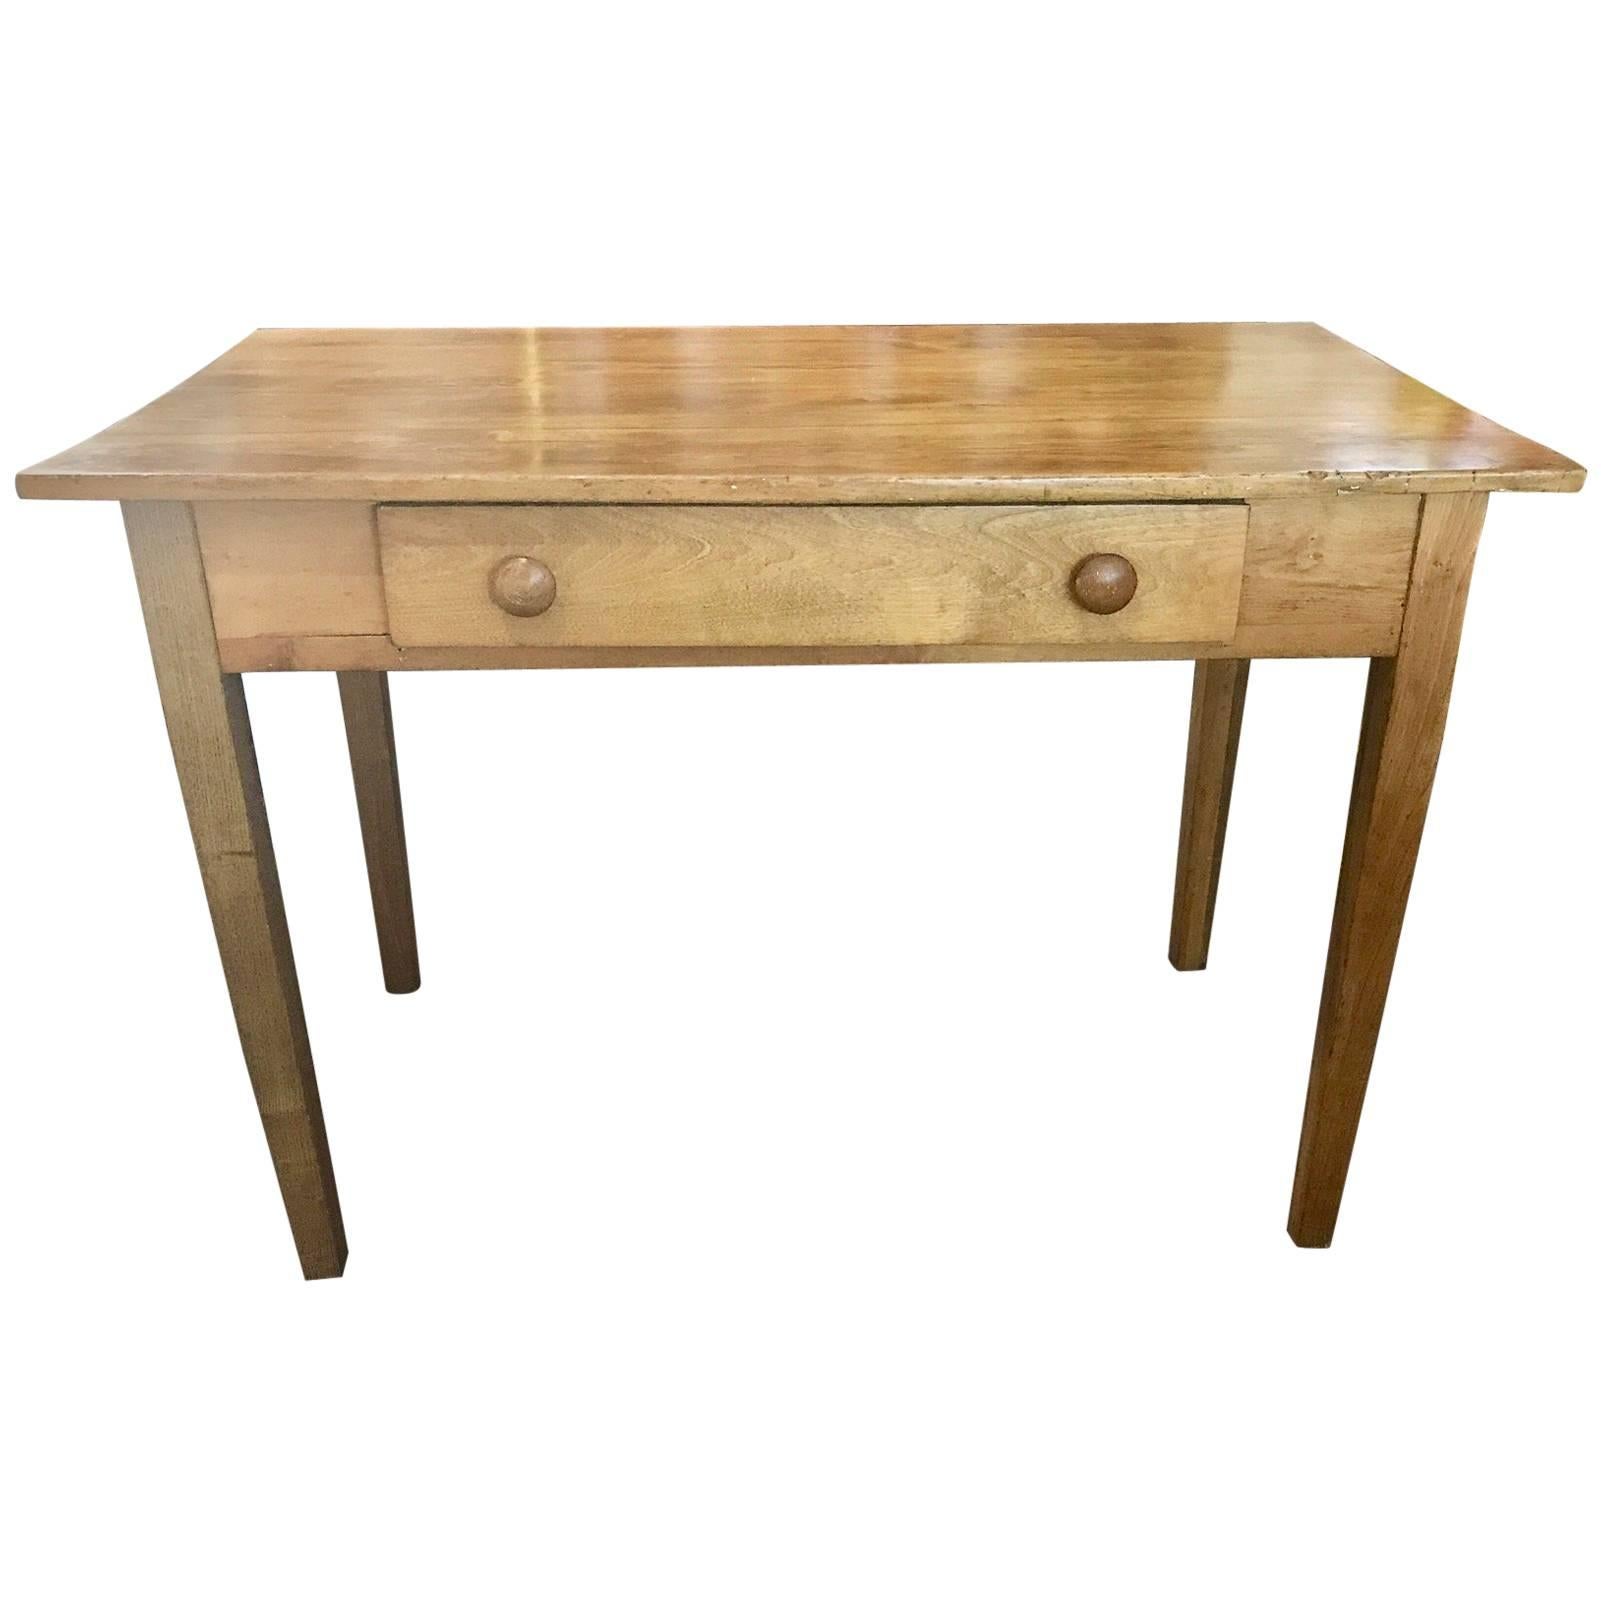 Vintage and Fabulous Petite Farm Table or Farm Desk, French Country Charmer